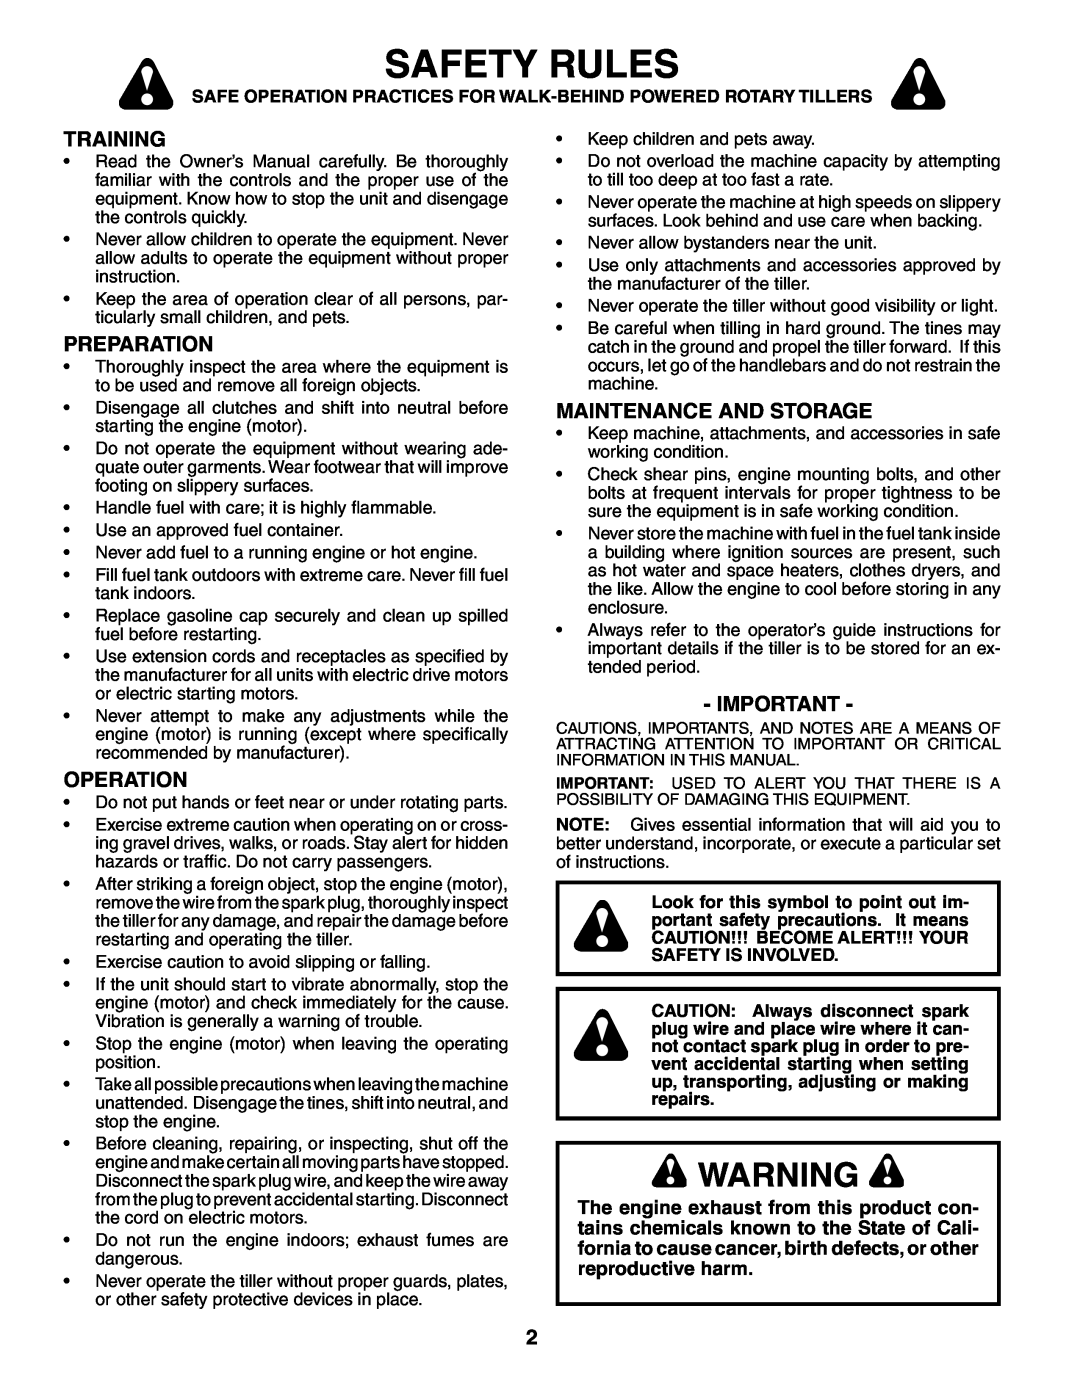 Poulan MRT500 owner manual Safety Rules, Training, Preparation, Operation, Maintenance And Storage 